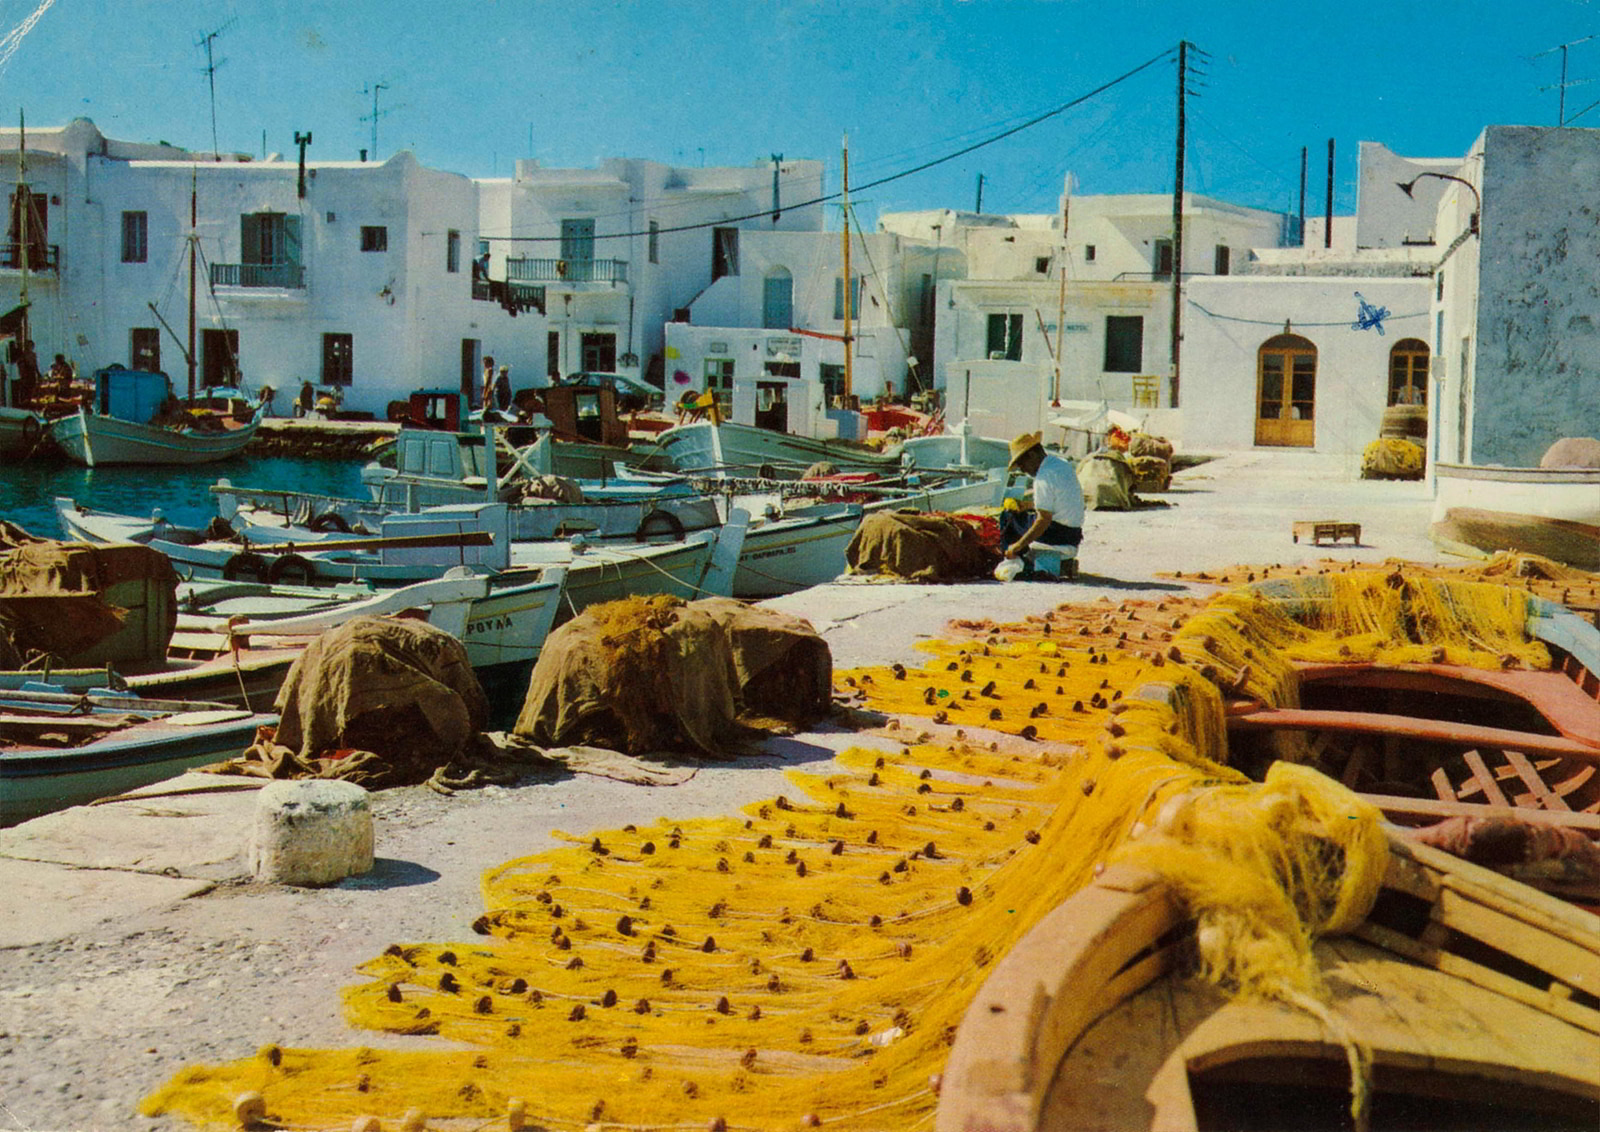 Archisearch Archipelago Network introduces its upcoming projects on the Cyclades islands